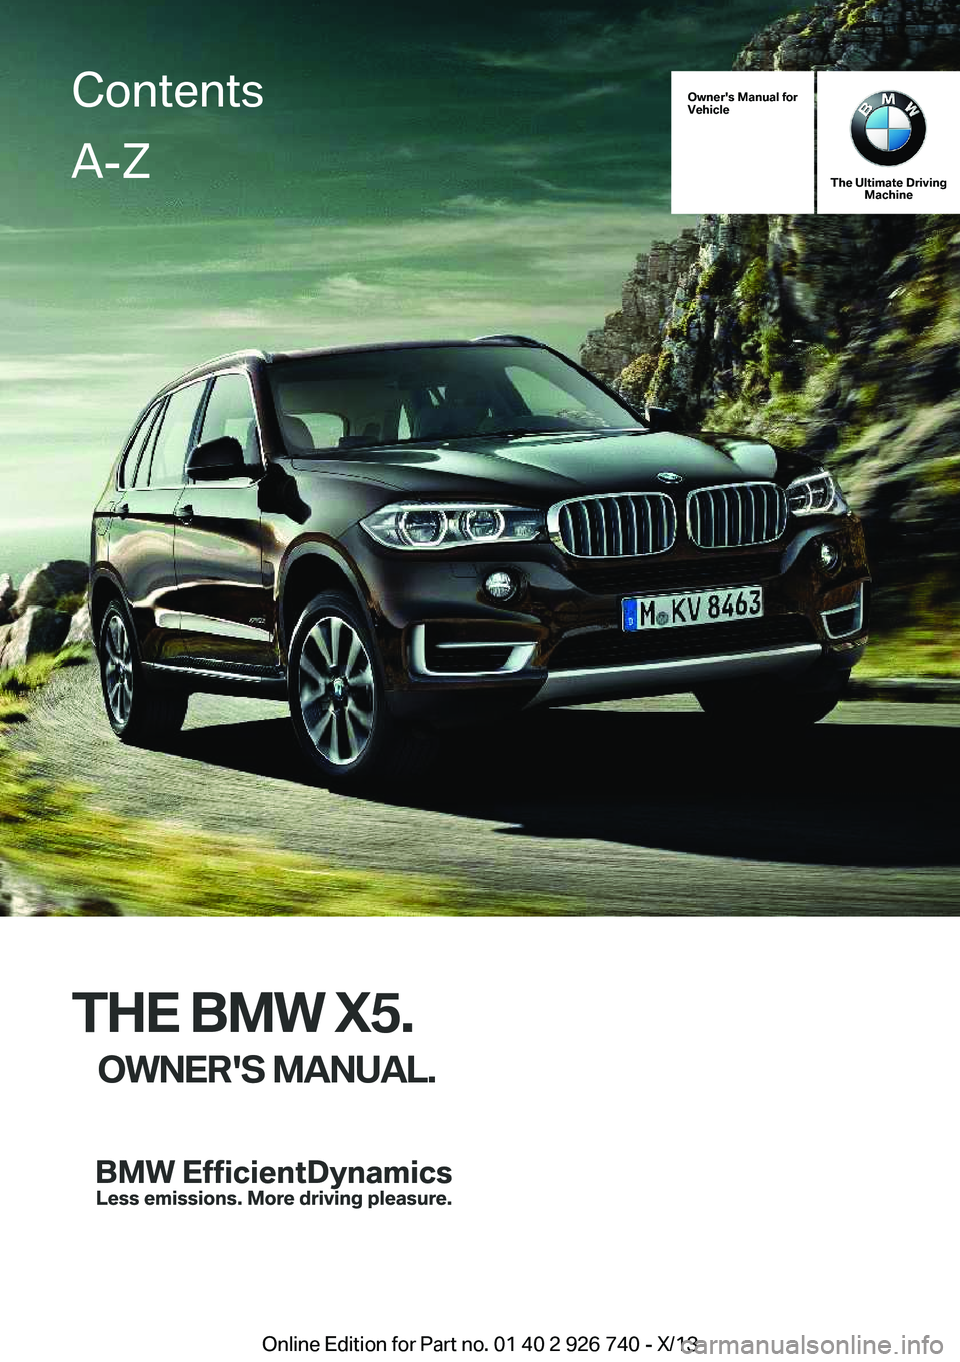 BMW X5 SDRIVE35I 2014  Owners Manual Owner's Manual for
Vehicle
The Ultimate Driving Machine
THE BMW X5.
OWNER'S MANUAL.
ContentsA-Z
Online Edition for Part no. 01 40 2 926 740 - X/13   